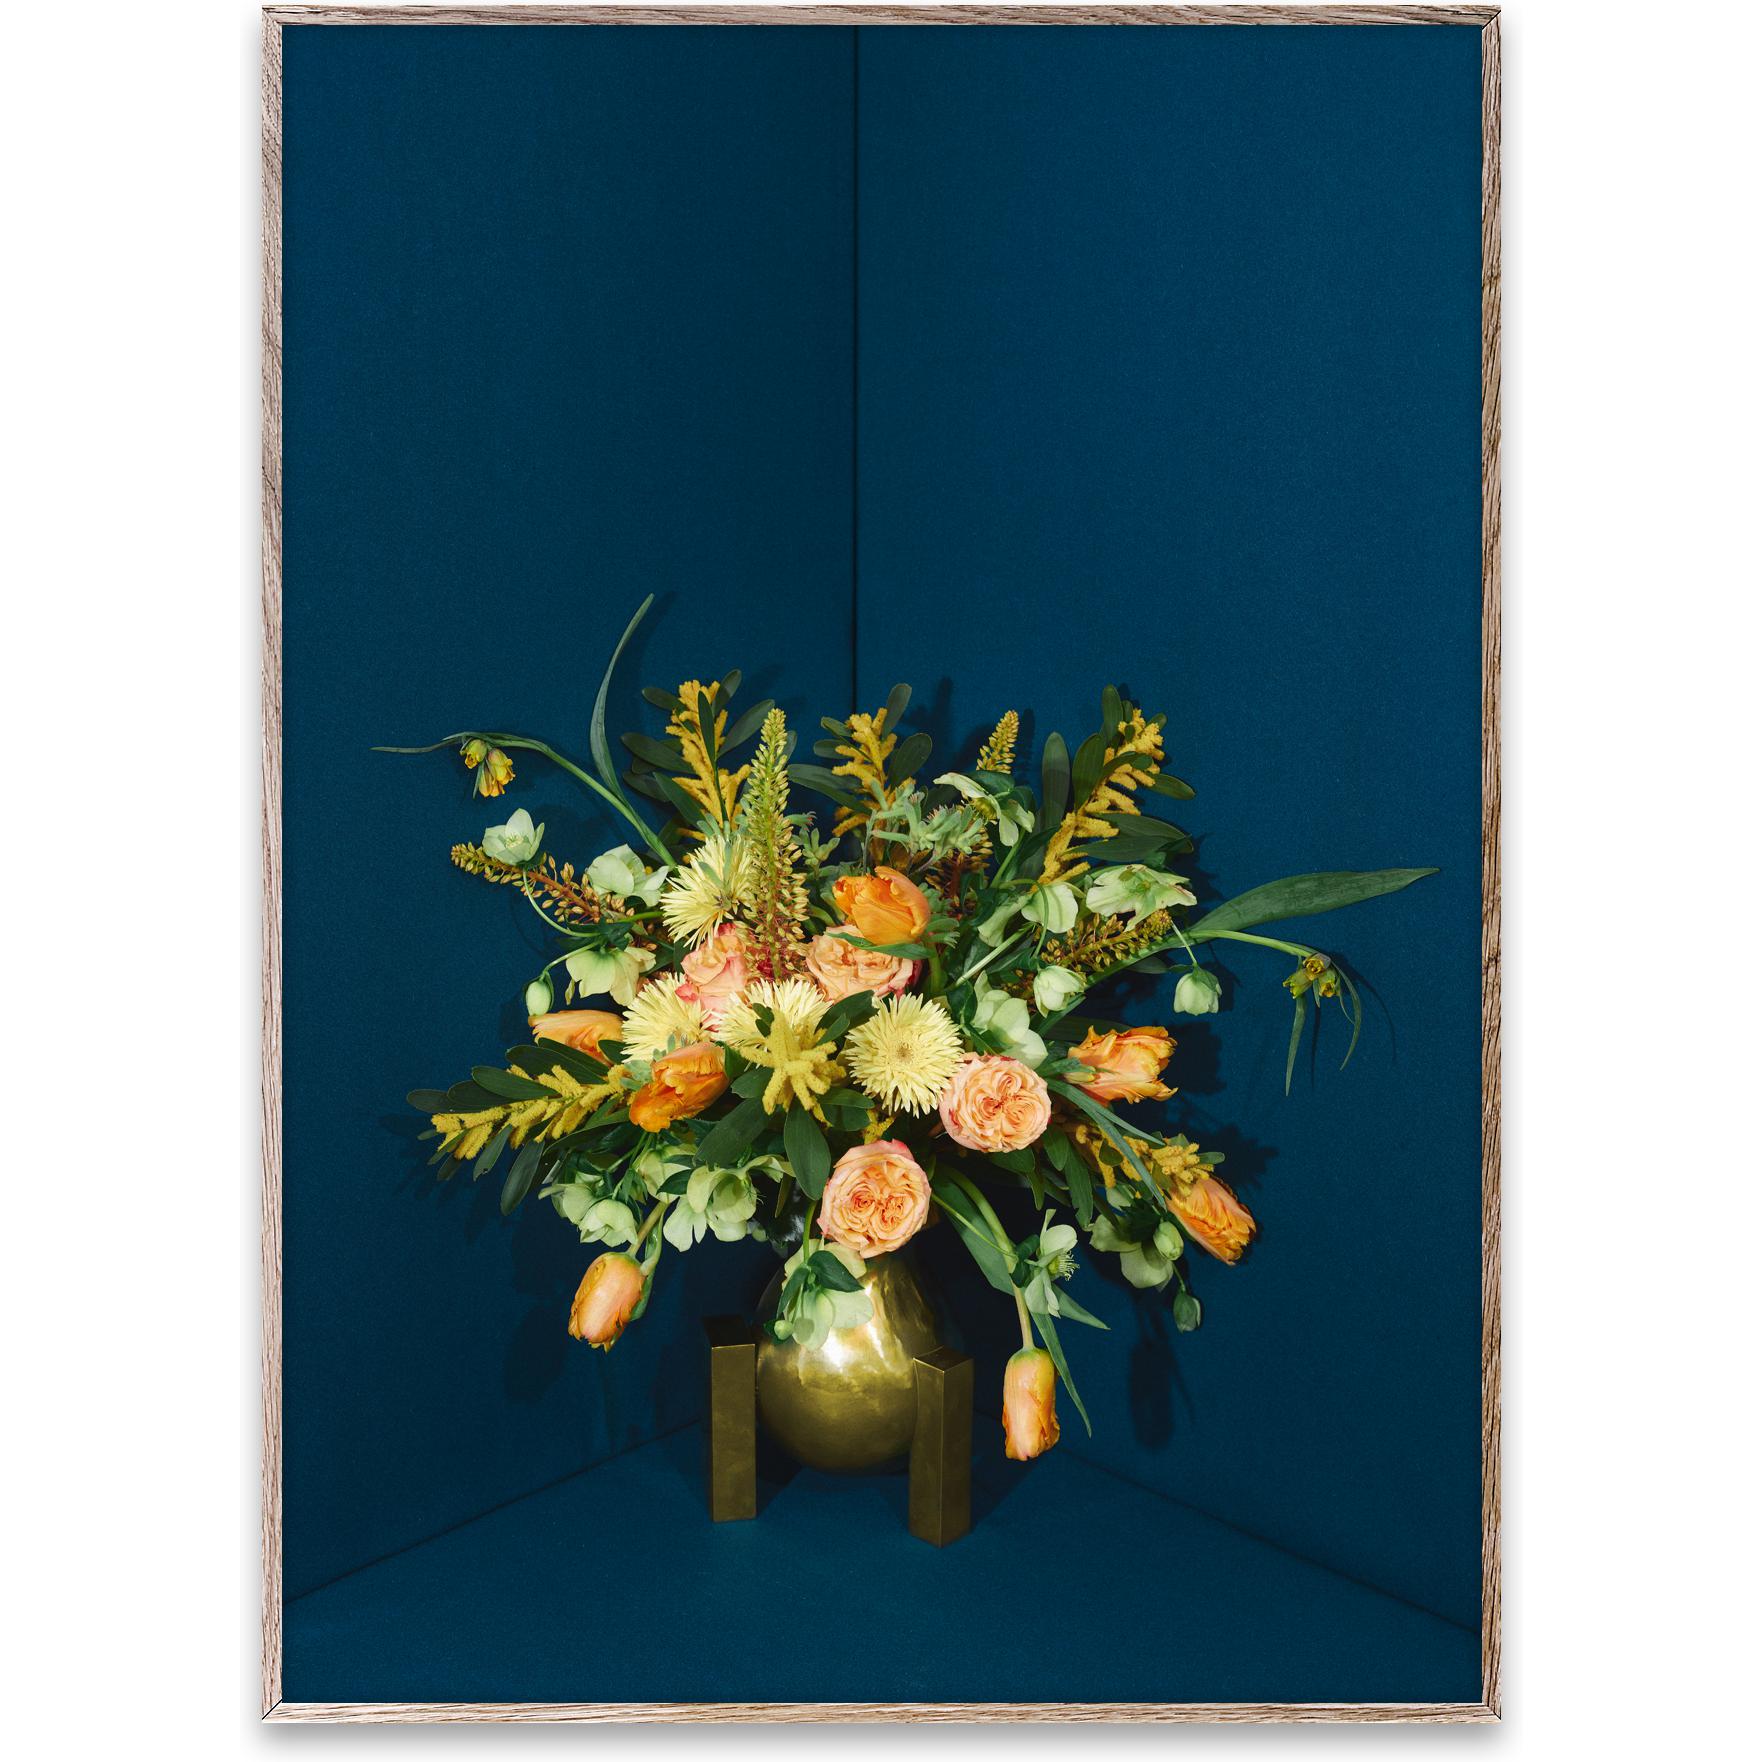 Paper Collective Flower 05 Poster 50x70 cm, bensin